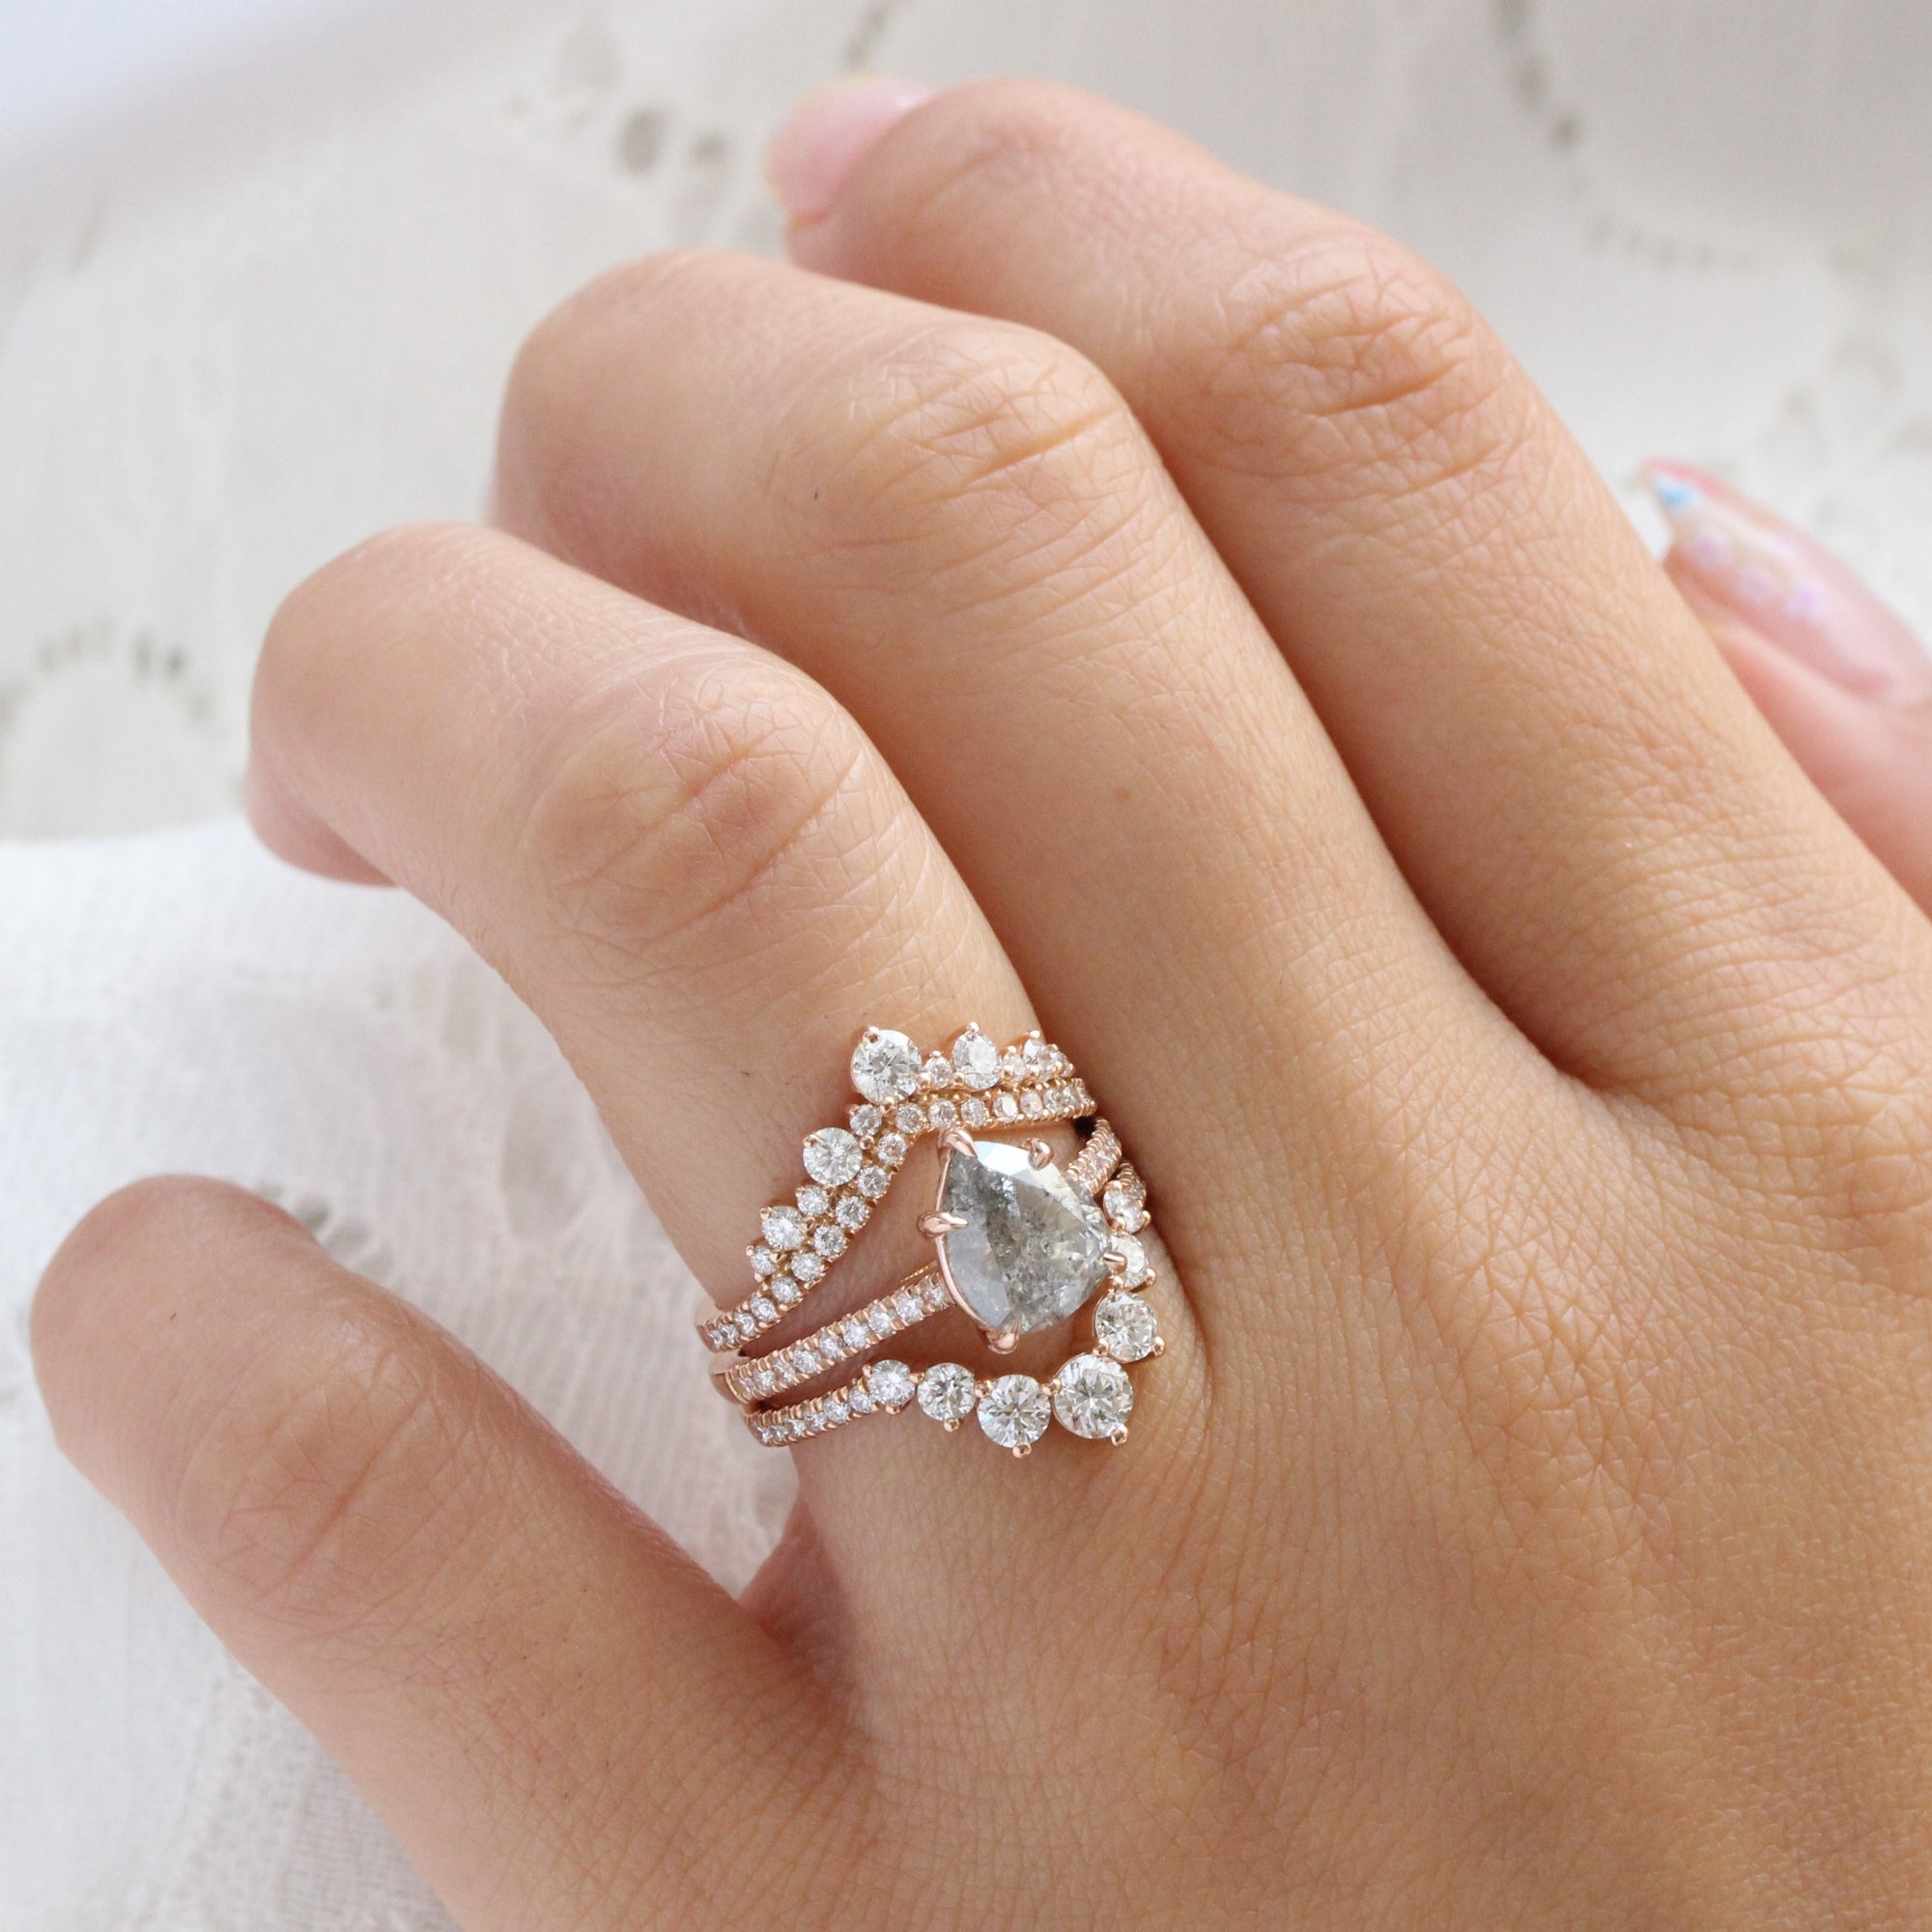 Pear salt and pepper diamond ring rose gold solitaire grey diamond pave ring la more design jewelry